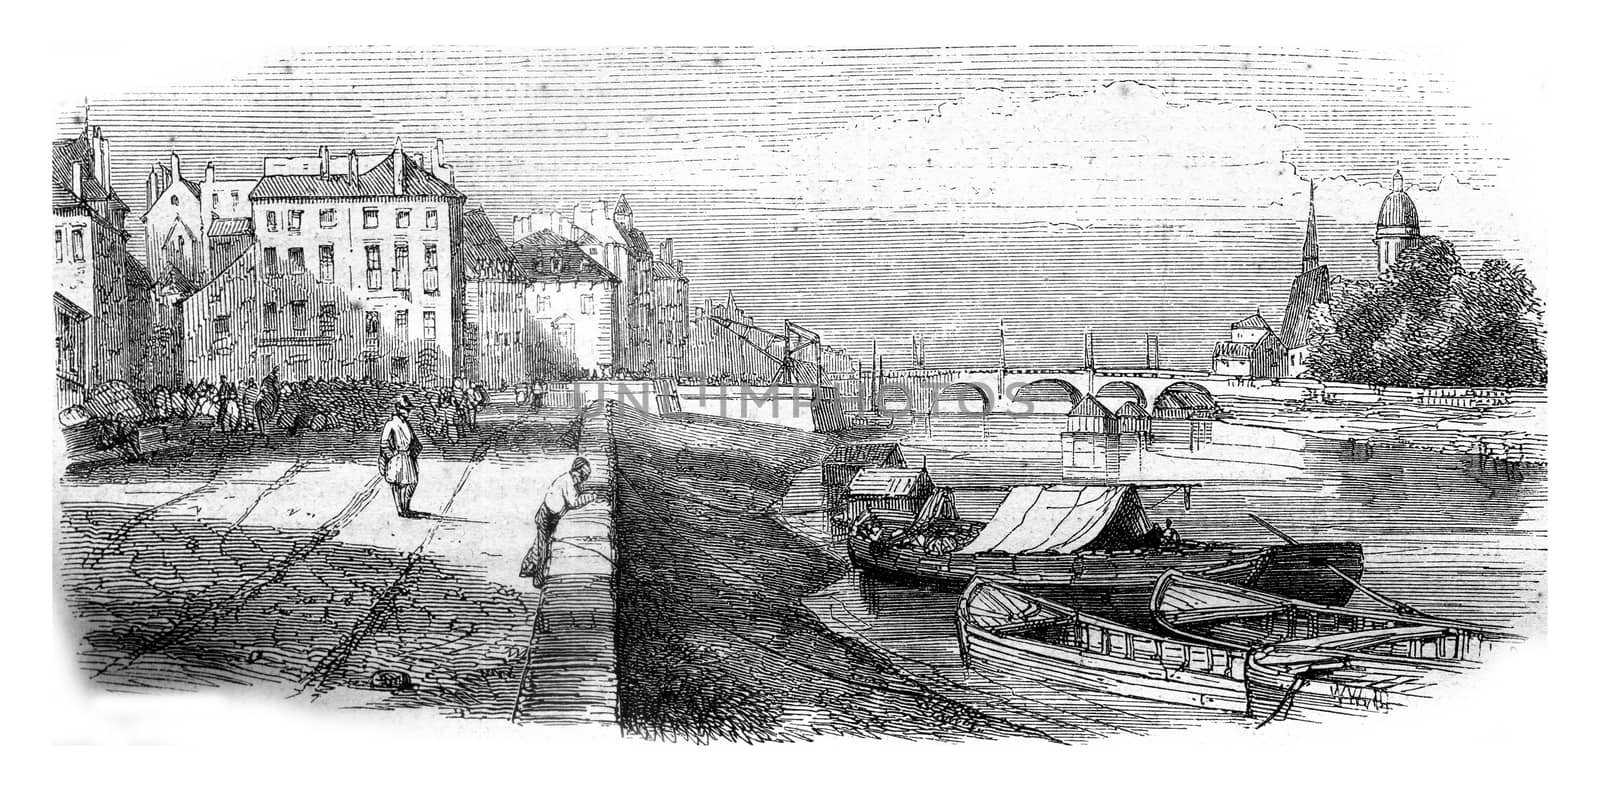 Chalons sur Saone, department of Saone et Loire, view from the dock, vintage engraved illustration. Magasin Pittoresque 1845.
